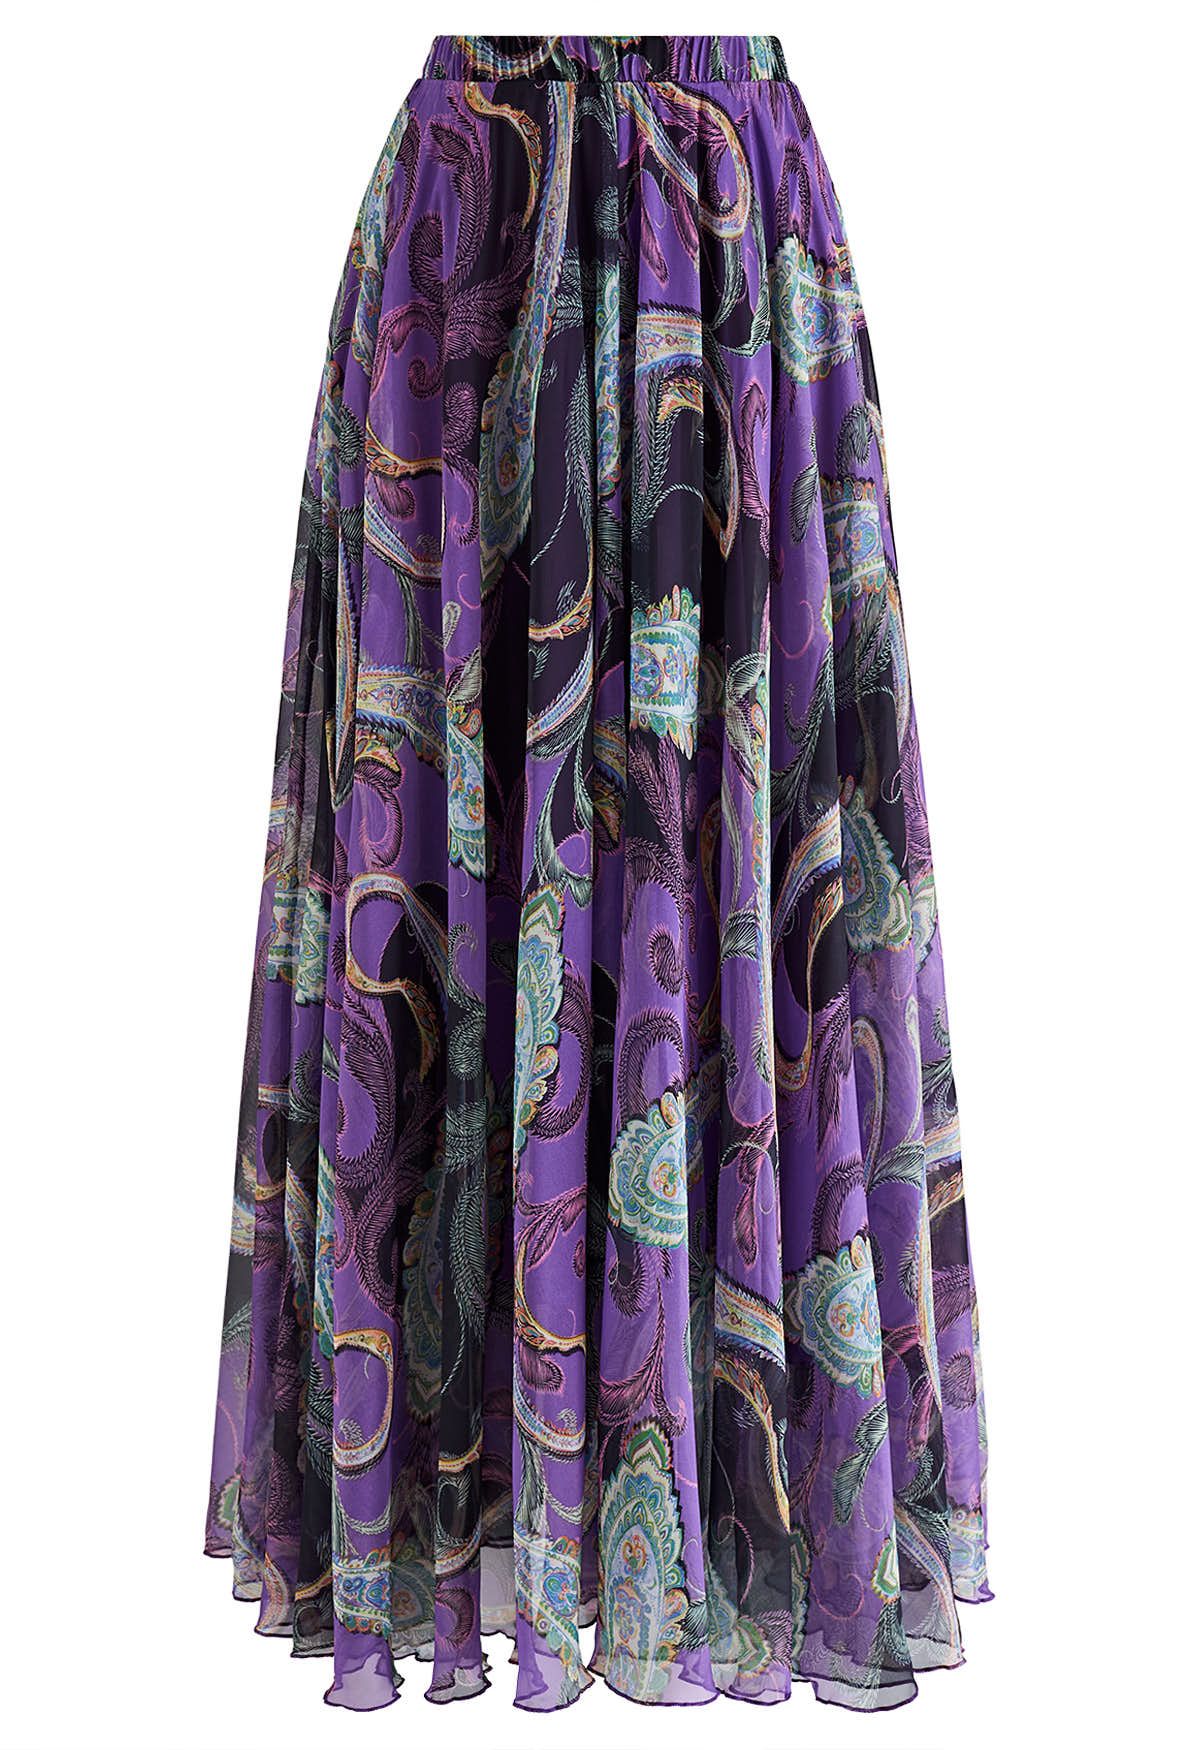 Exotic Paisley Chiffon Maxi Skirt in Purple - Retro, Indie and Unique ...